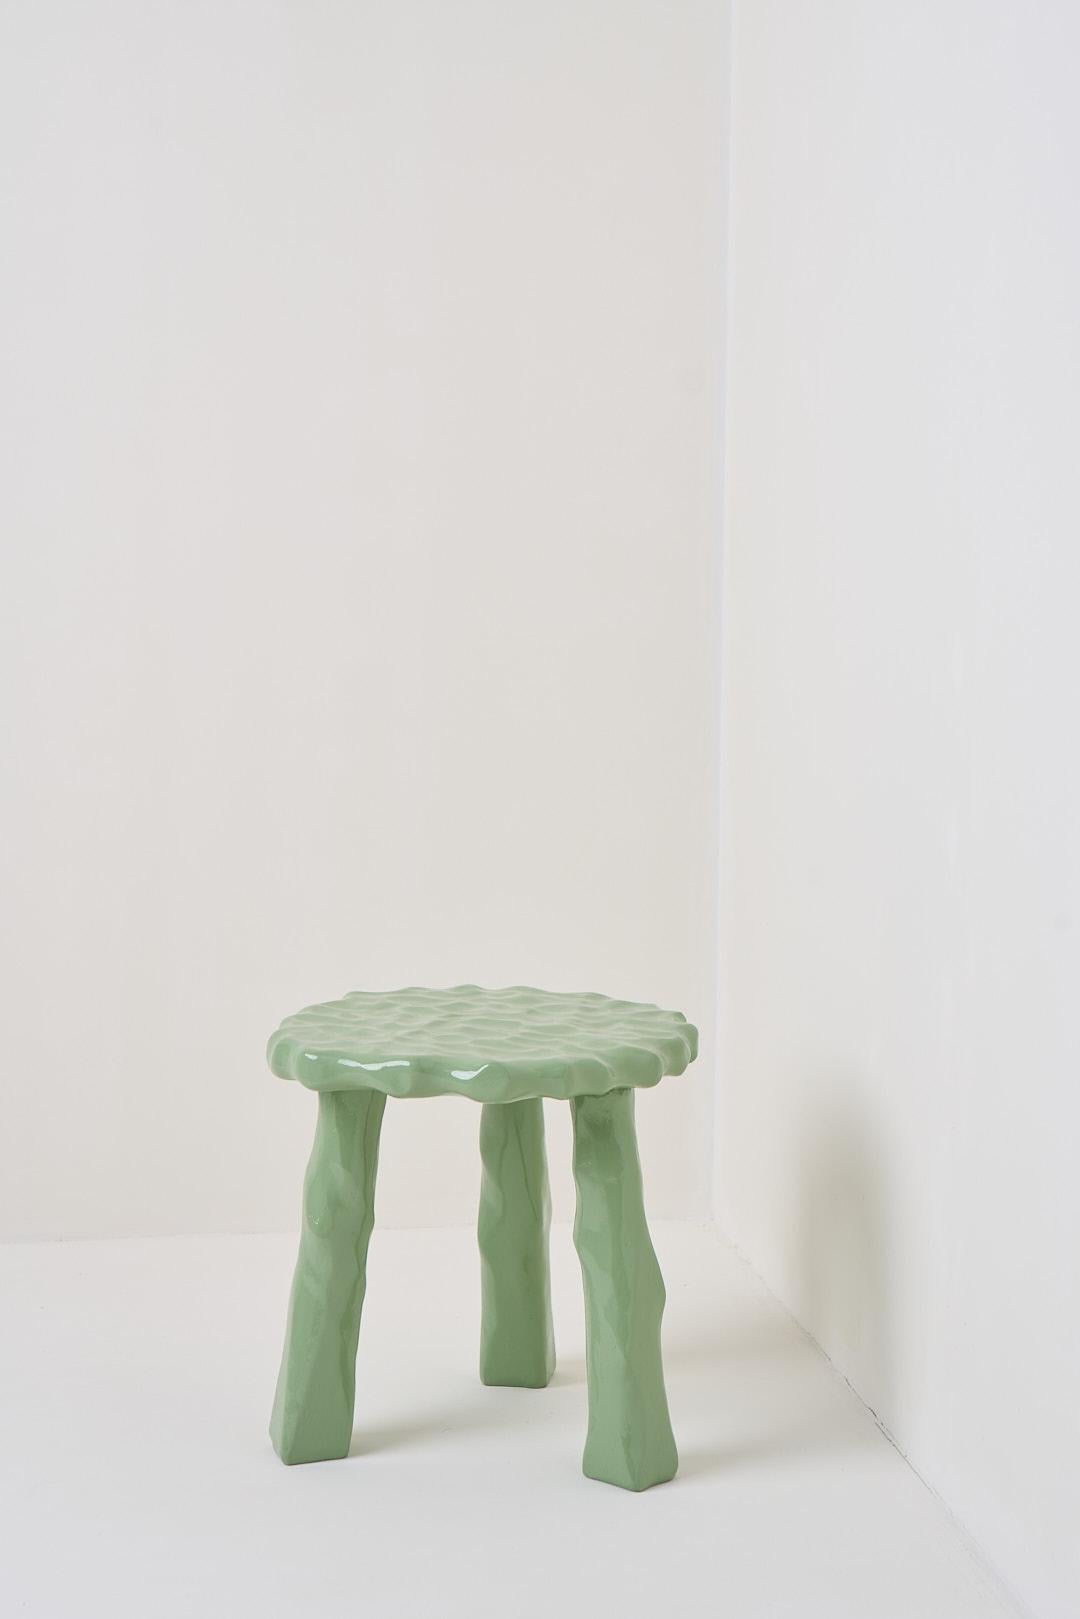 Brazilian Afinco Collection, Low Asparagus Green Wooden Stool For Sale